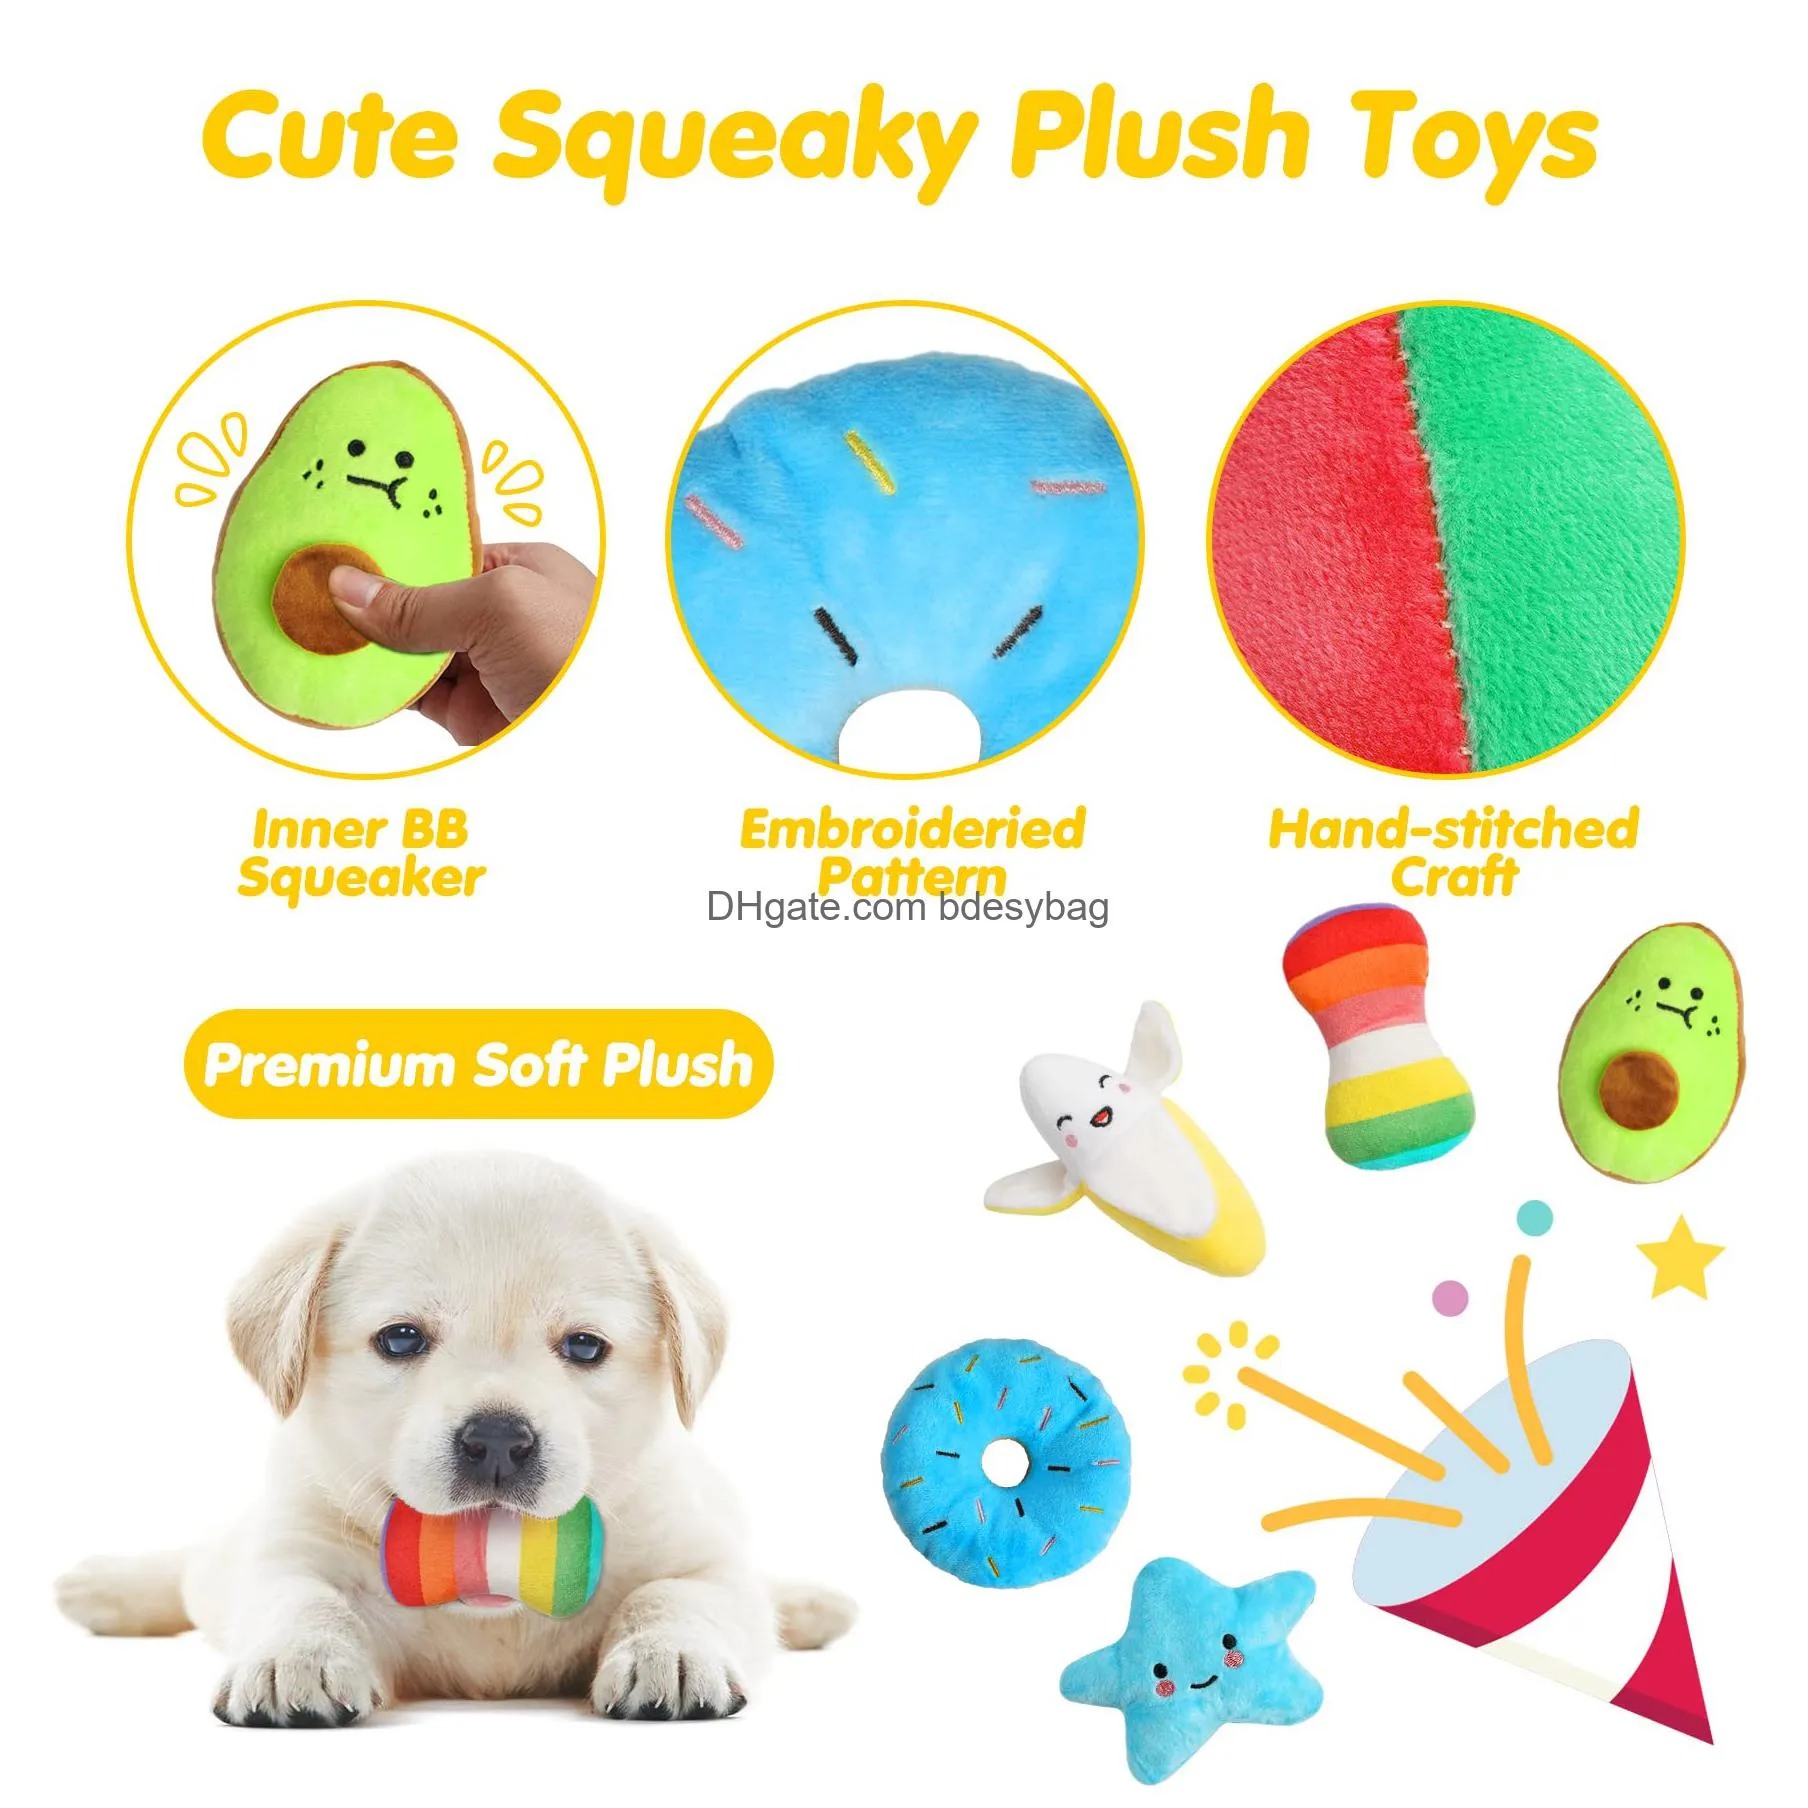 luxury dog chew toys for puppy cute small dog toys with ropes puppy chew toys treat ball and squeaky puppy toys for teething